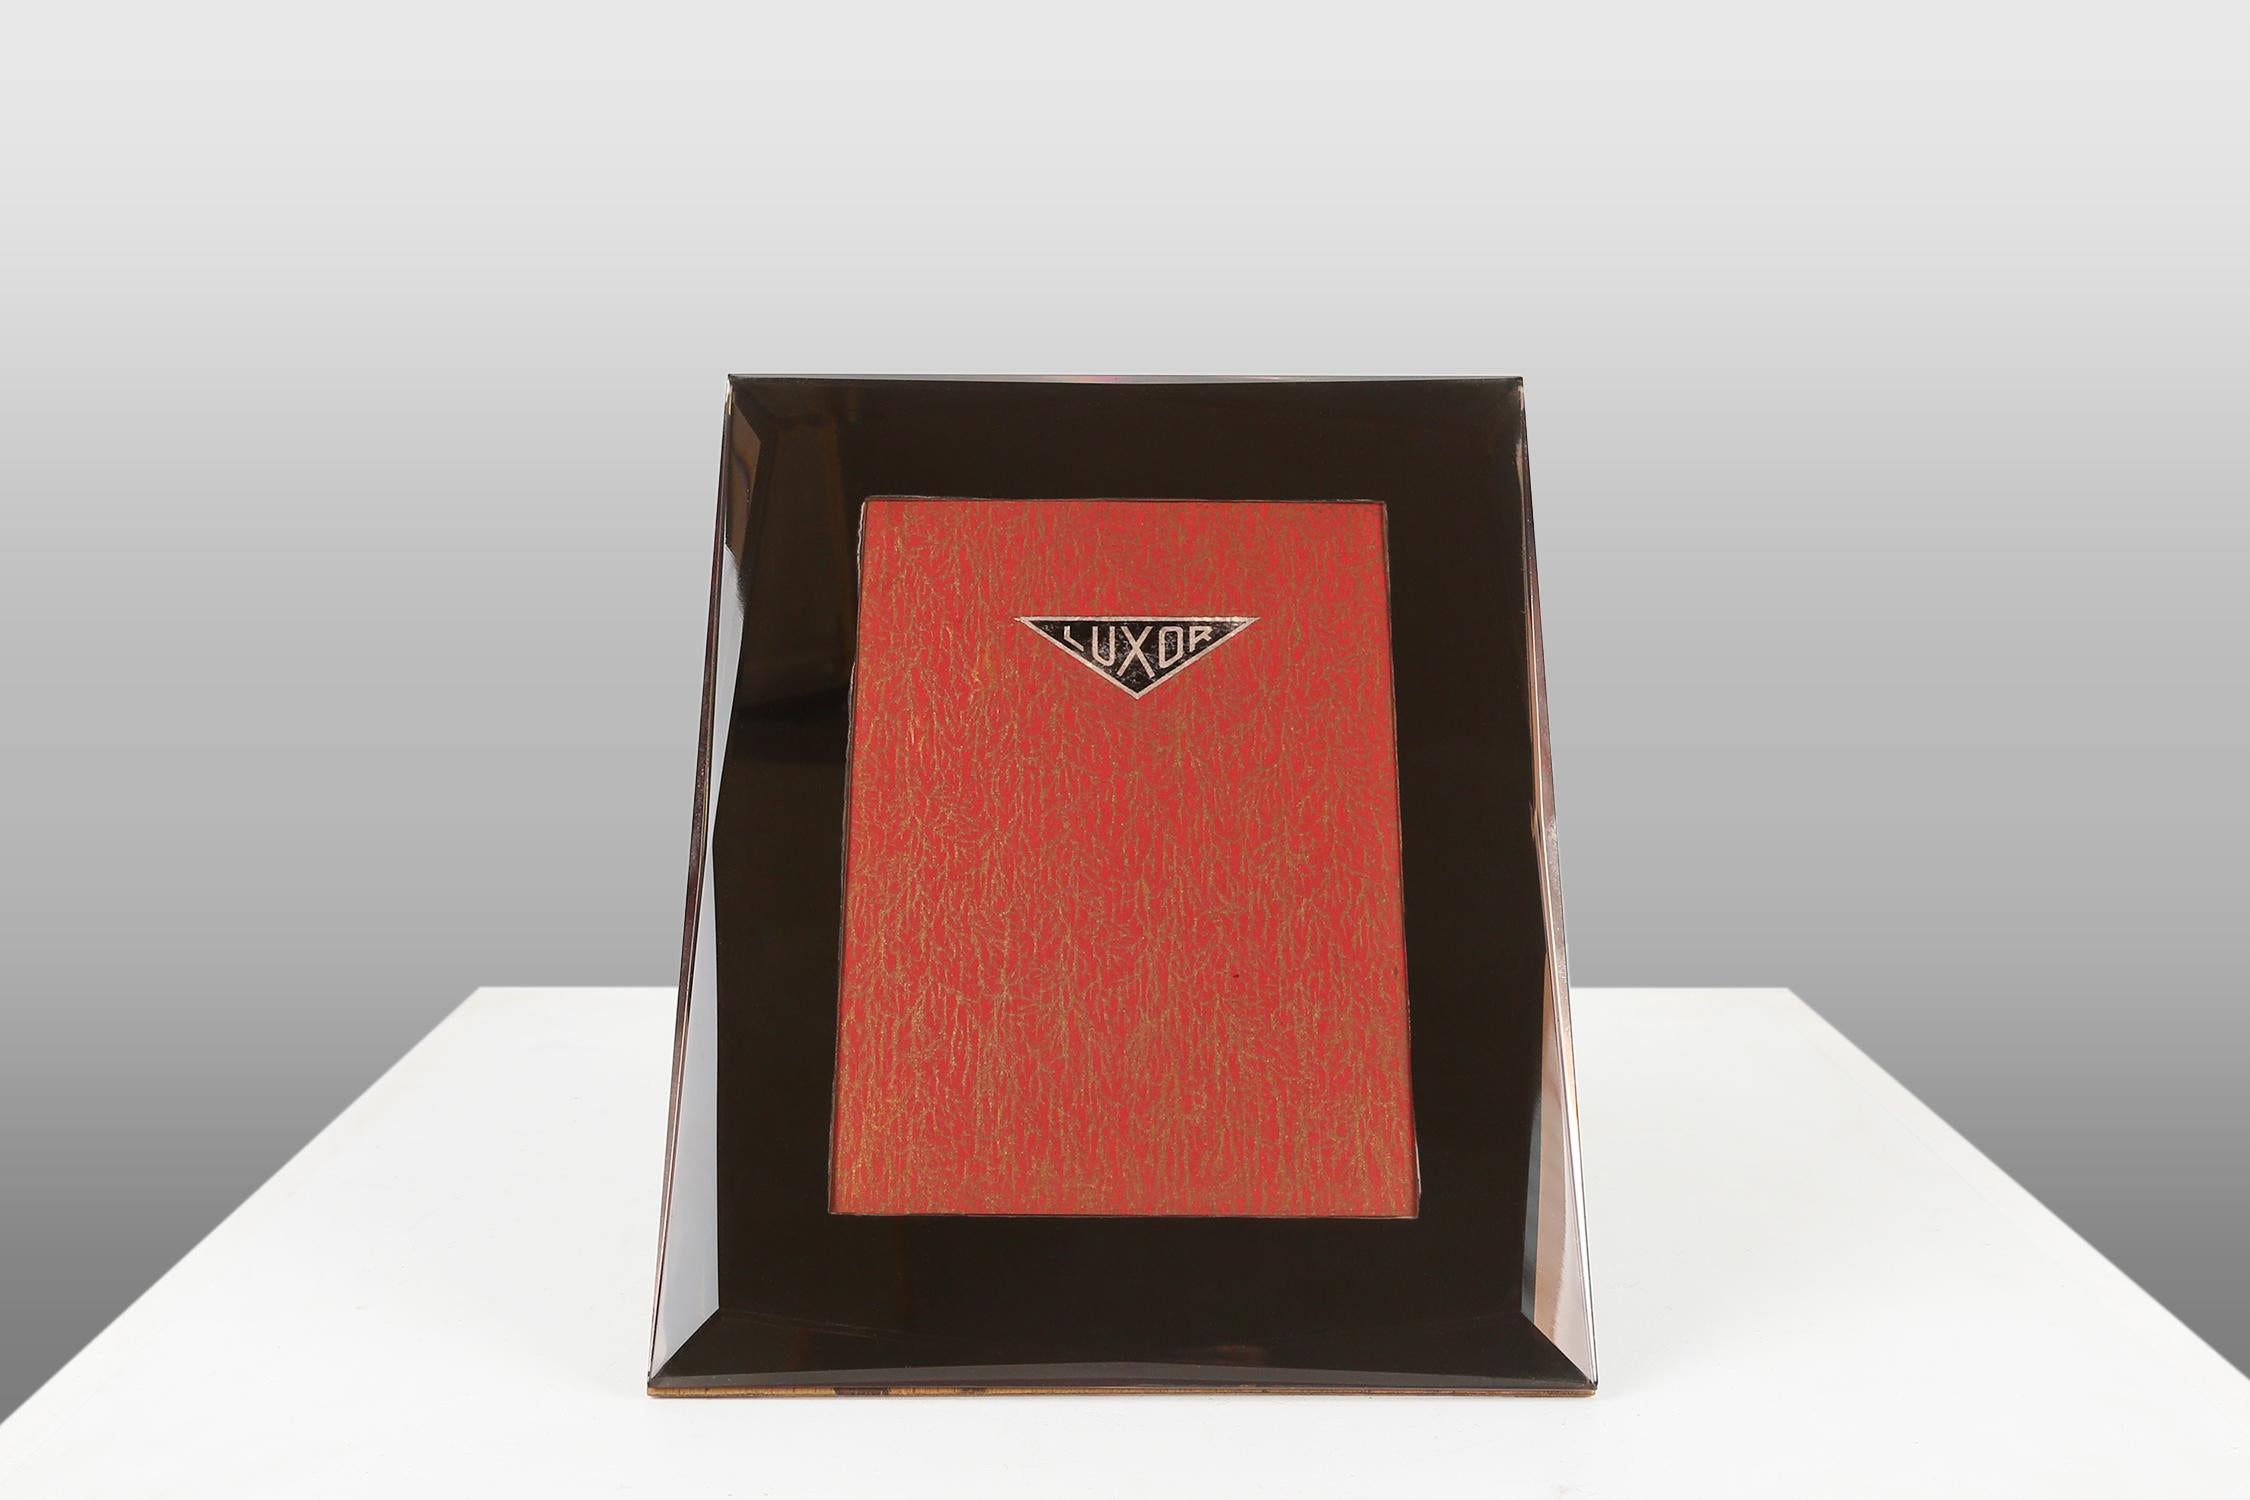 France / 1930s / Luxor / standing square photo frame with cut pink mirror passe-partout / mirror glass and wood / Art Deco / mid-century

An exquisite French vintage photo frame with pink mirror passe-partout from 1930s by Luxor. Crafted with